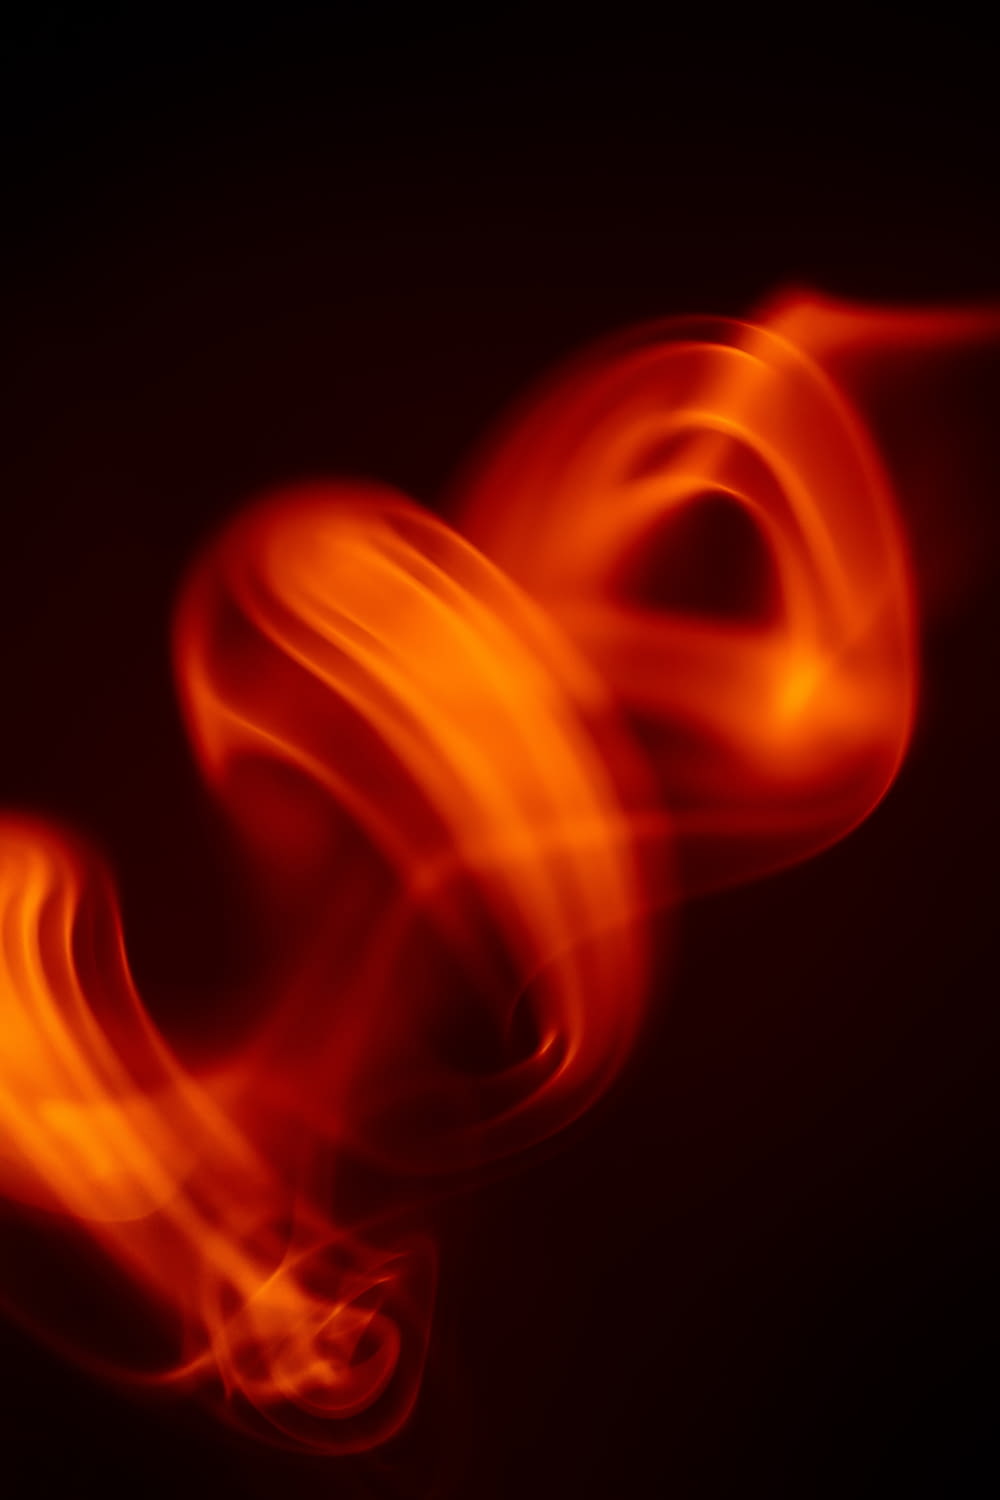 a blurry photo of a red object on a black background